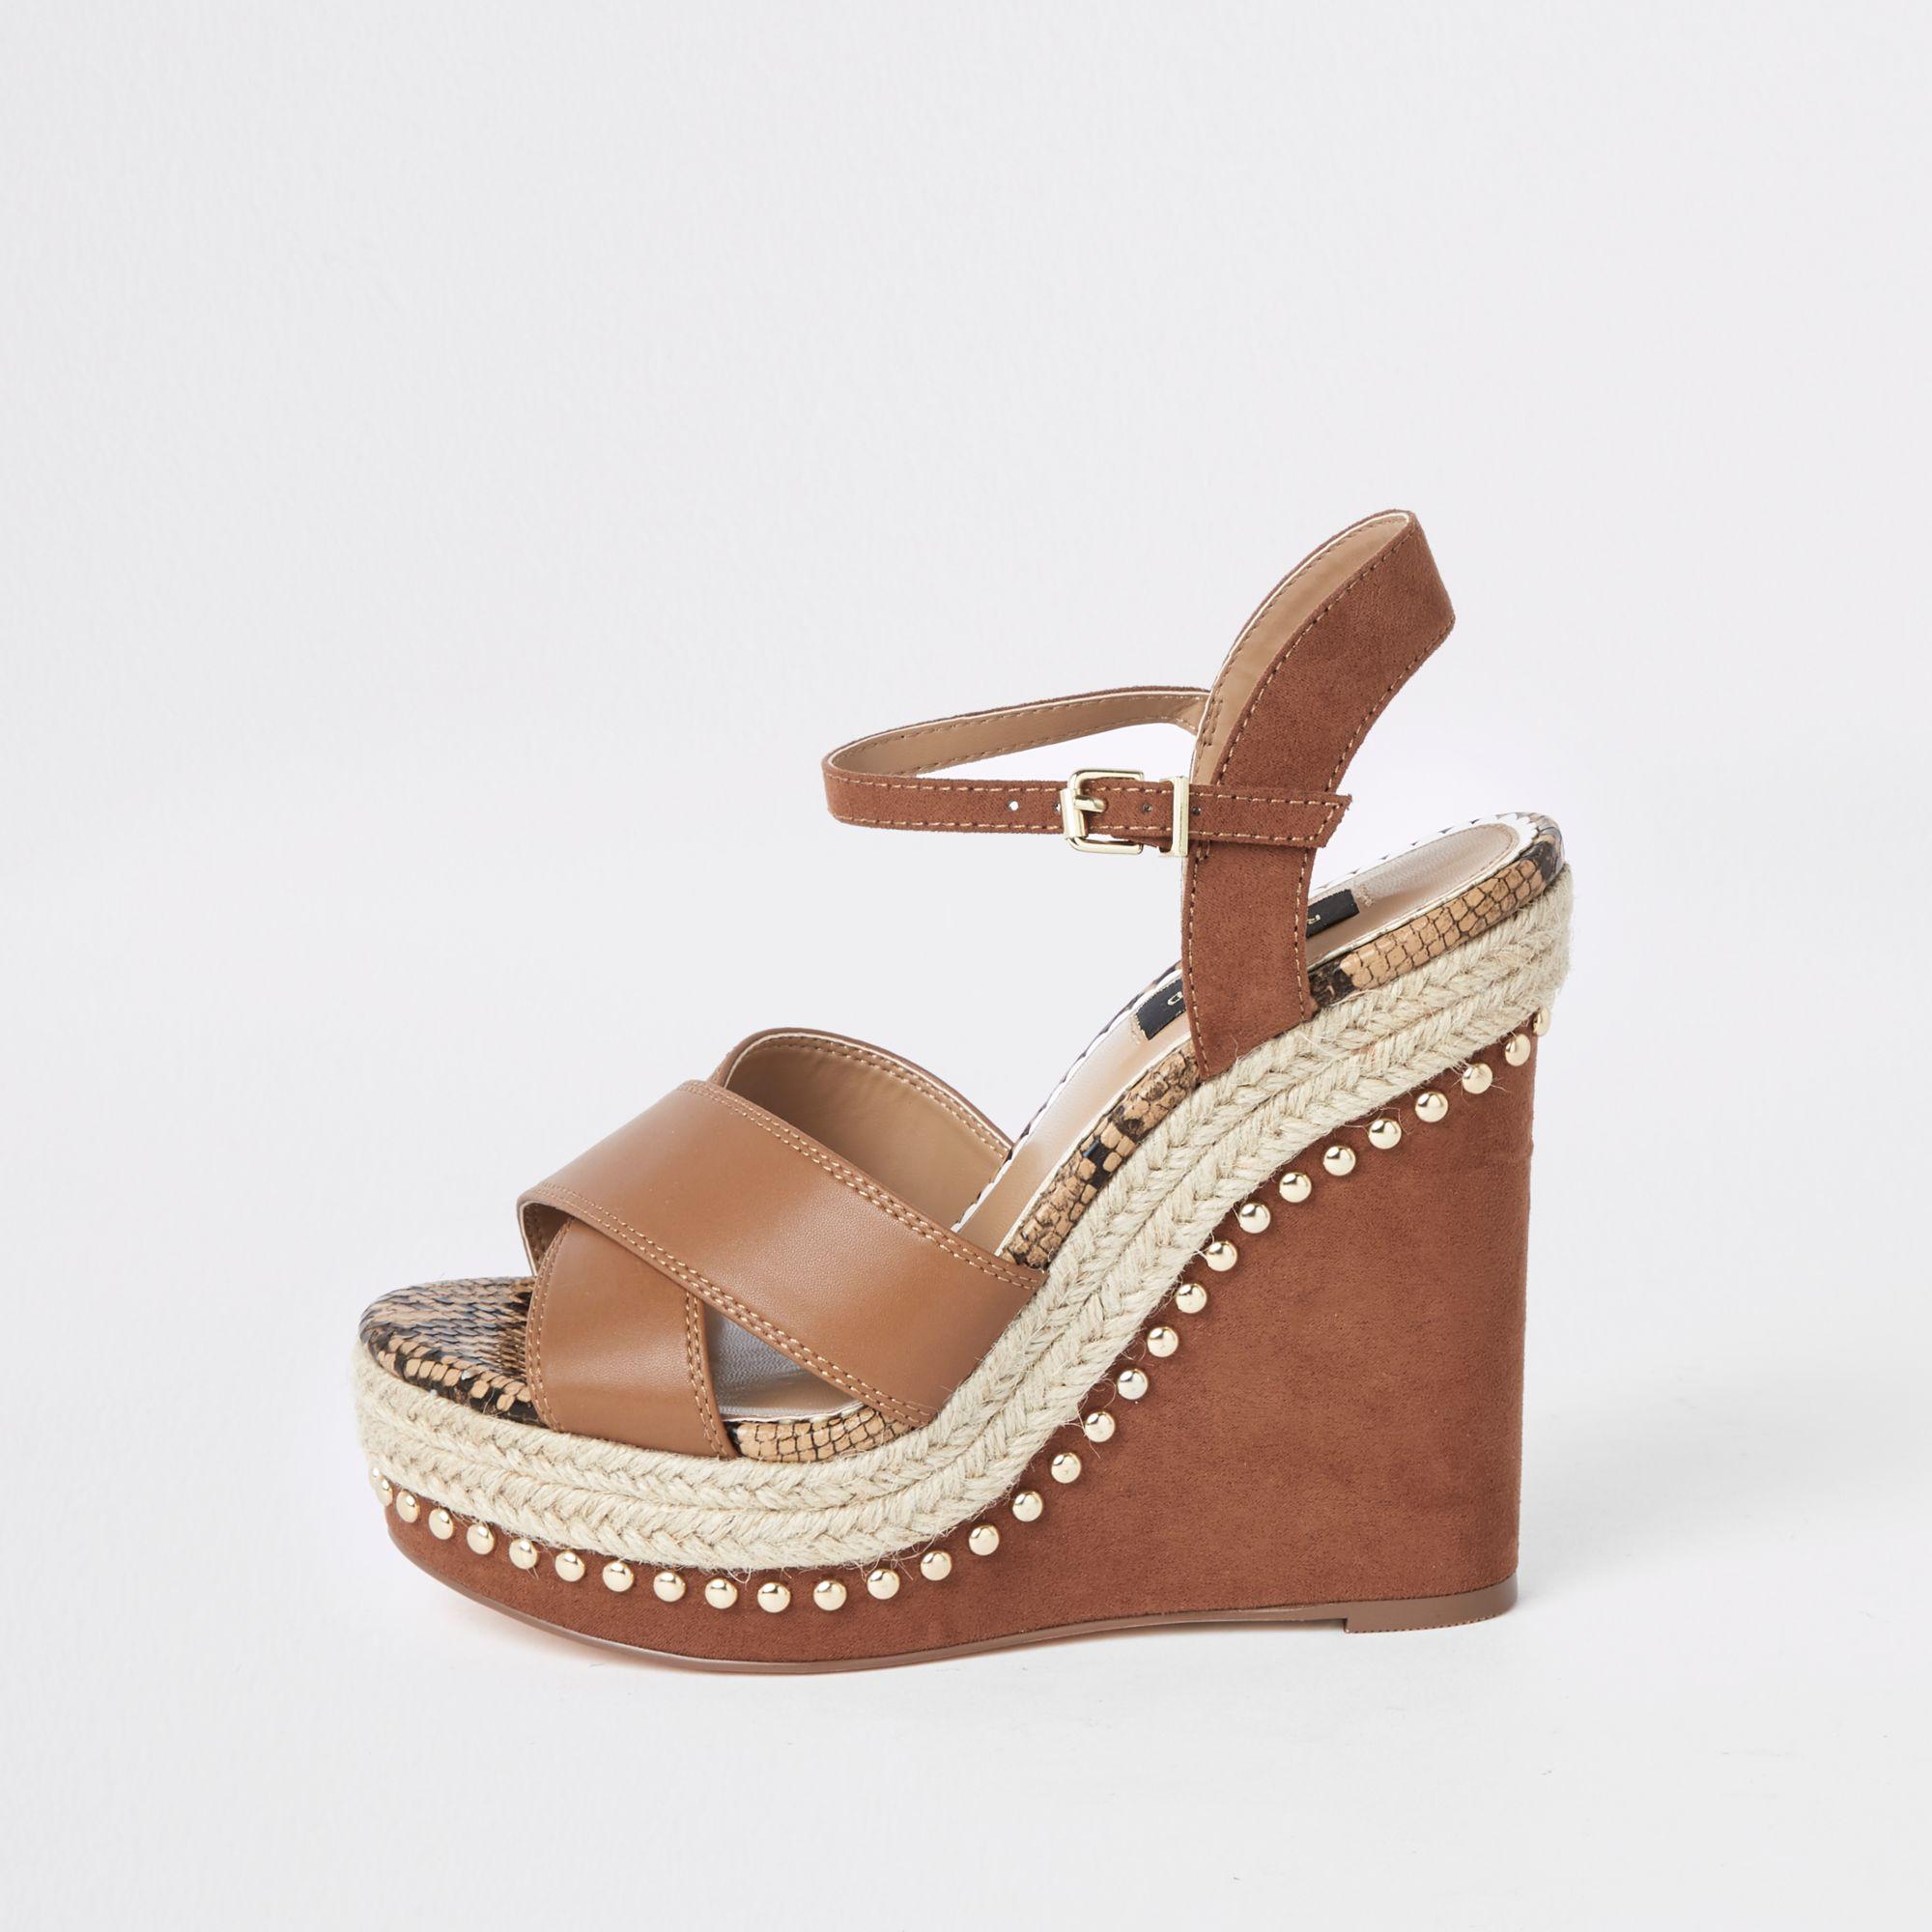 River Island Light Studded Wide Fit Wedges in Brown - Lyst